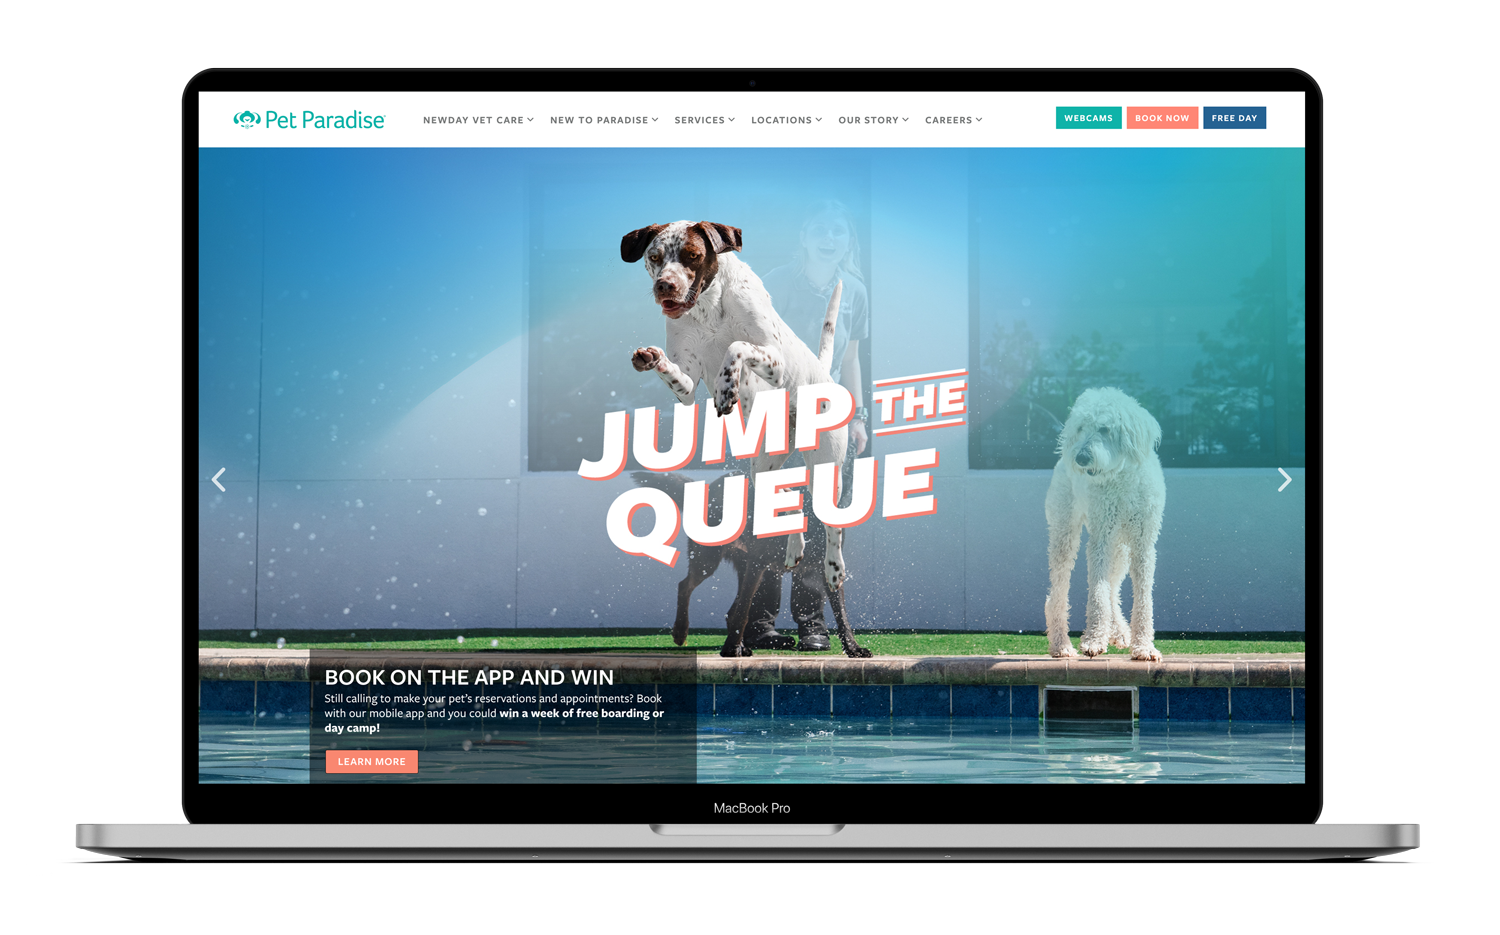 Pet Paradise homepage showing a promotion for their Jump the Queue marketing campaign.